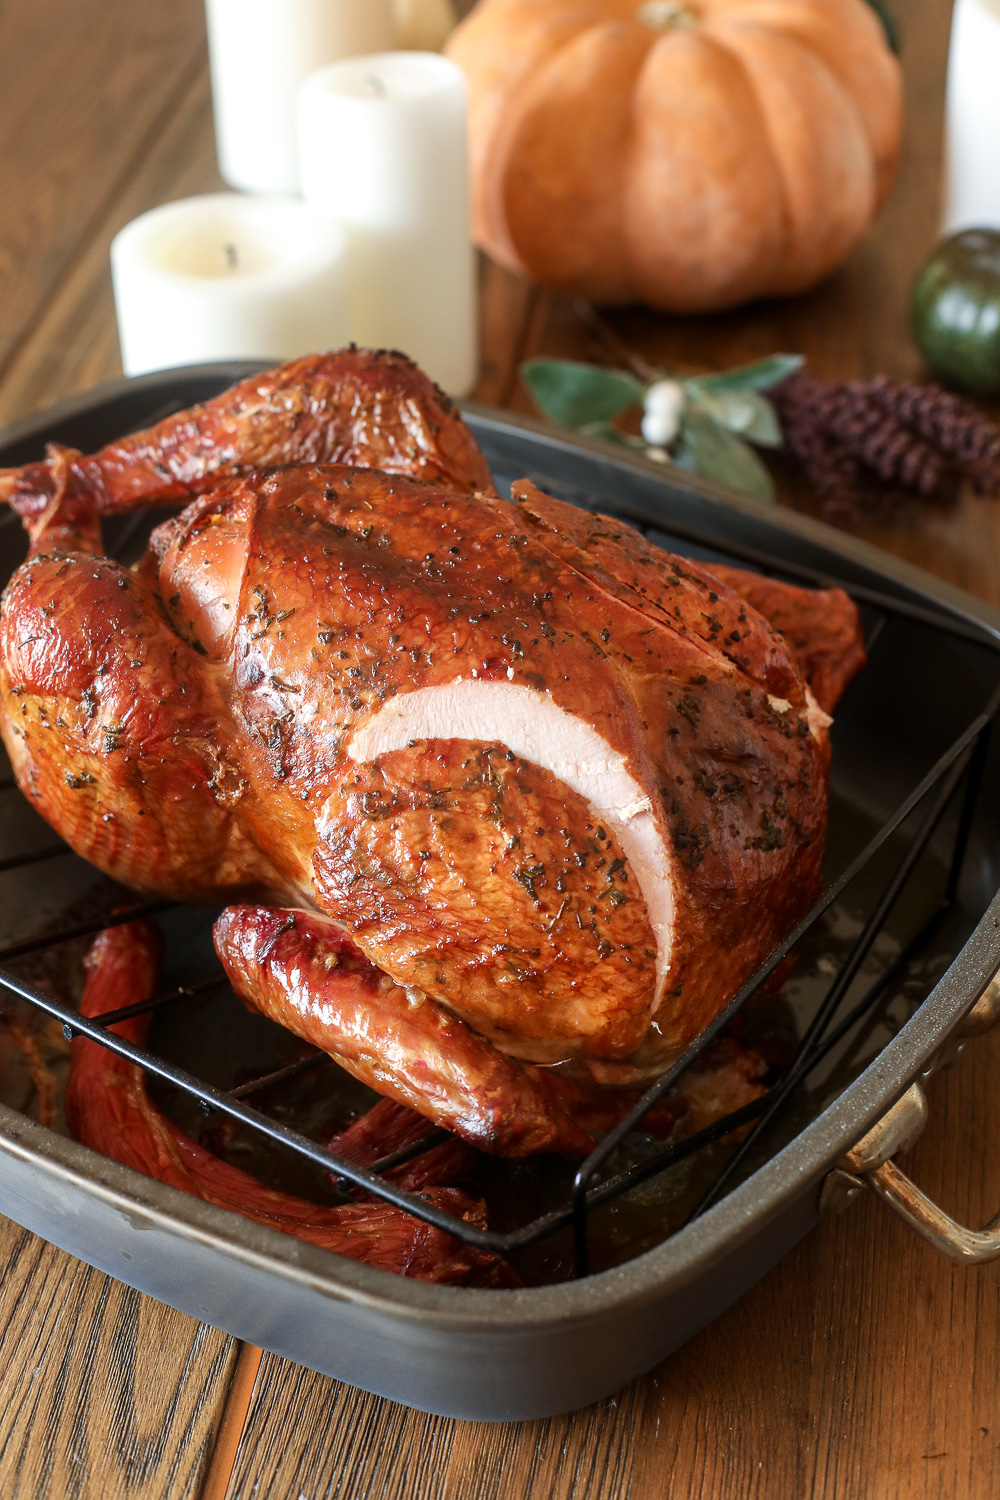 This Whole30 Smoked Turkey recipe is simple, delicious and perfect for saving oven space on thanksgiving!